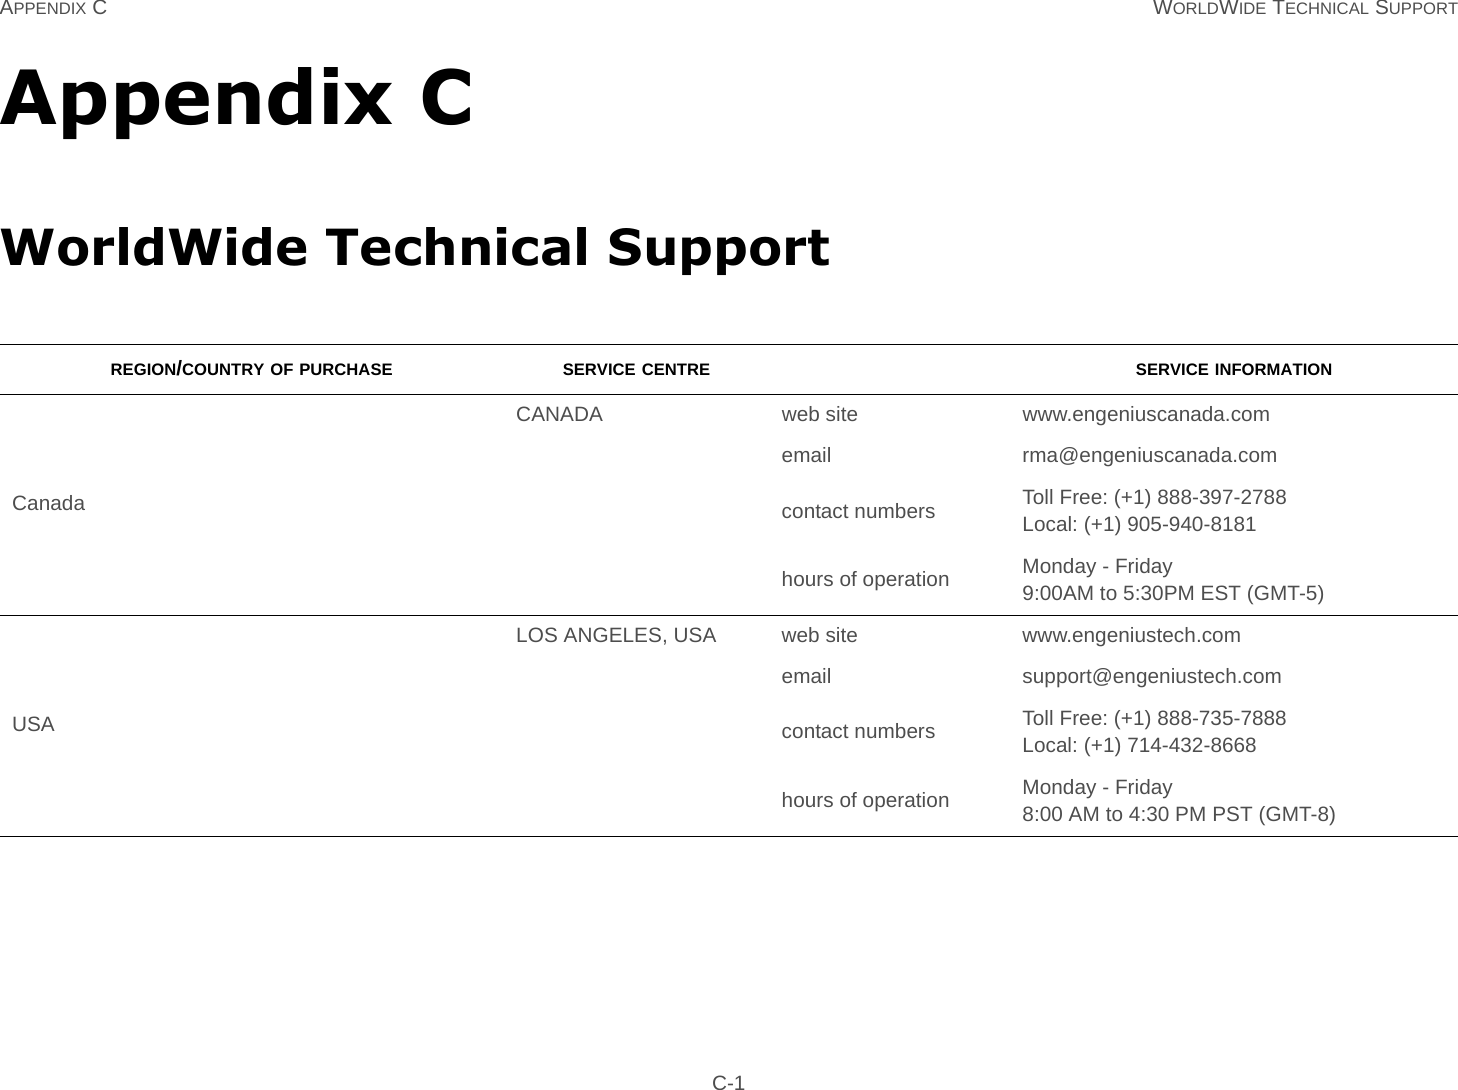 APPENDIX C WORLDWIDE TECHNICAL SUPPORT C-1Appendix CWorldWide Technical SupportREGION/COUNTRY OF PURCHASE SERVICE CENTRE SERVICE INFORMATIONCanadaCANADA web site www.engeniuscanada.comemail rma@engeniuscanada.comcontact numbers Toll Free: (+1) 888-397-2788Local: (+1) 905-940-8181hours of operation Monday - Friday9:00AM to 5:30PM EST (GMT-5)USALOS ANGELES, USA web site www.engeniustech.comemail support@engeniustech.comcontact numbers Toll Free: (+1) 888-735-7888Local: (+1) 714-432-8668hours of operation Monday - Friday8:00 AM to 4:30 PM PST (GMT-8)